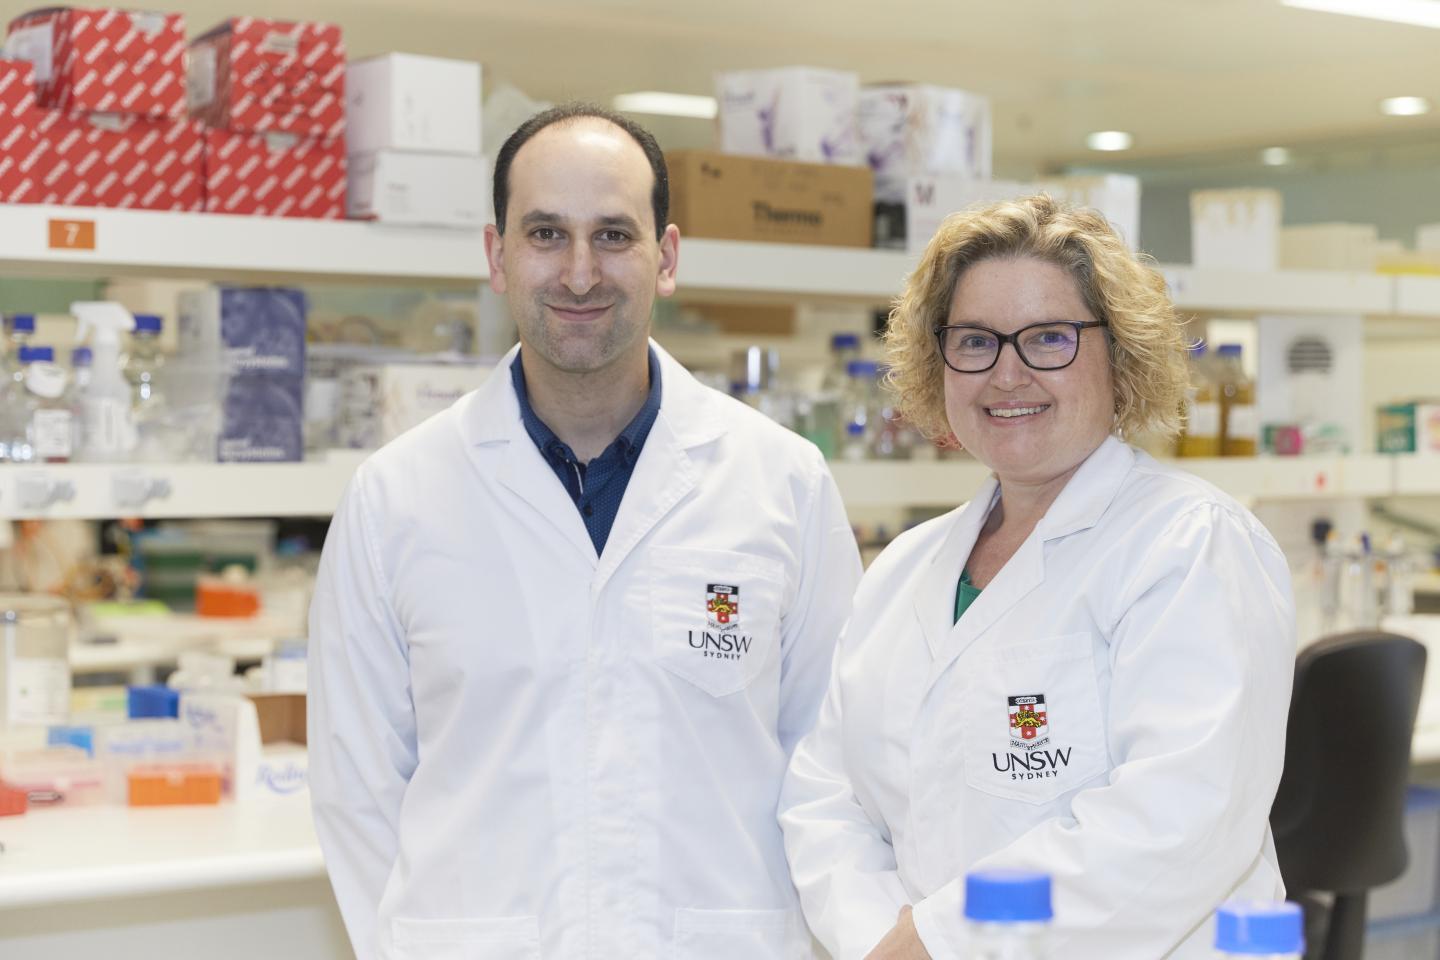 Dr George Sharbeen and Associate Professor Phoebe Phillips